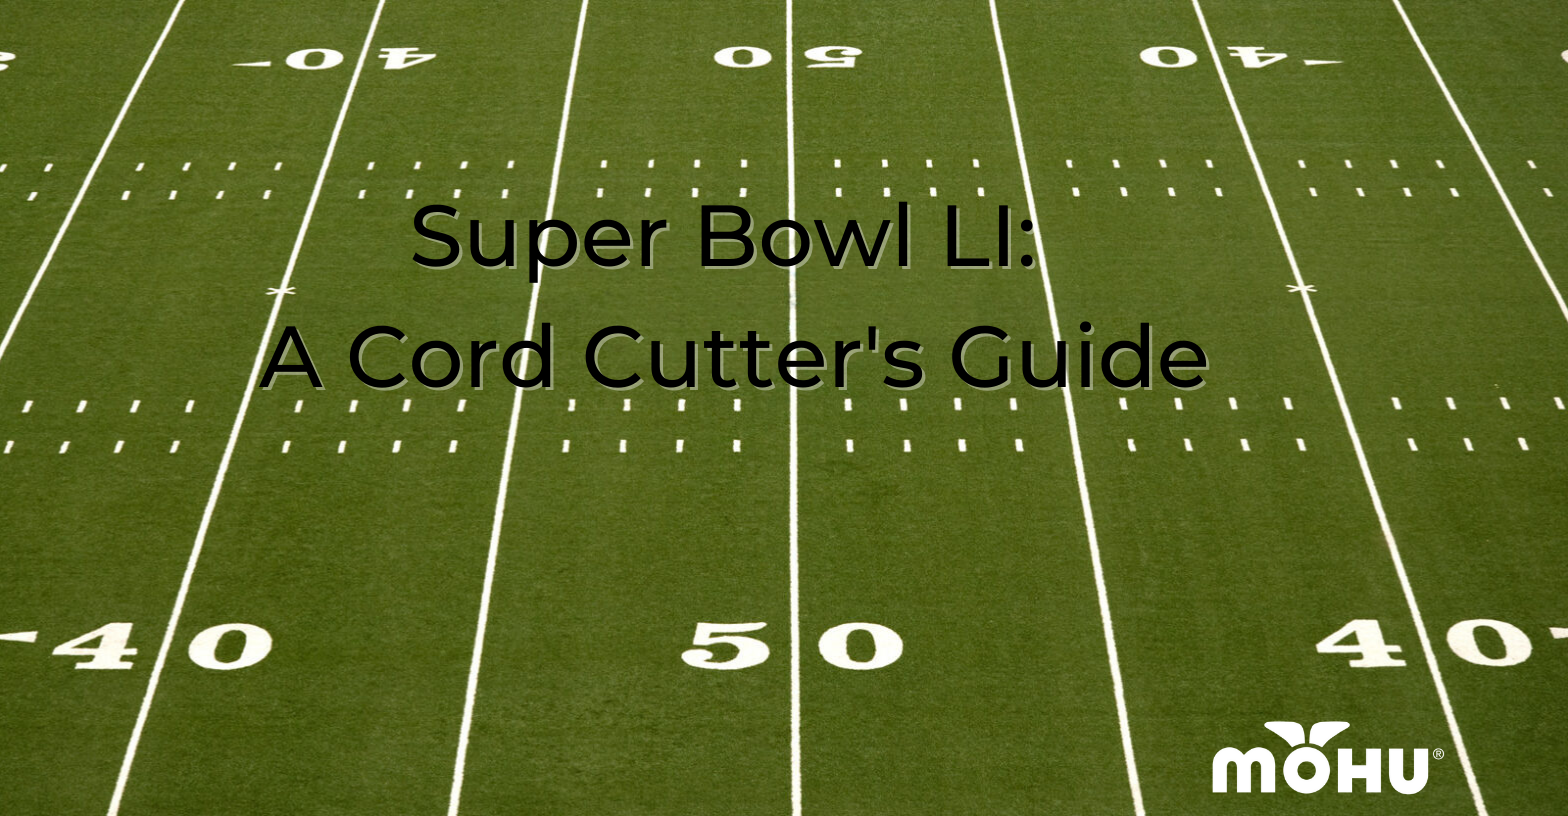 Football field with the copy "Super Bowl LI: A cord cutter's guide"